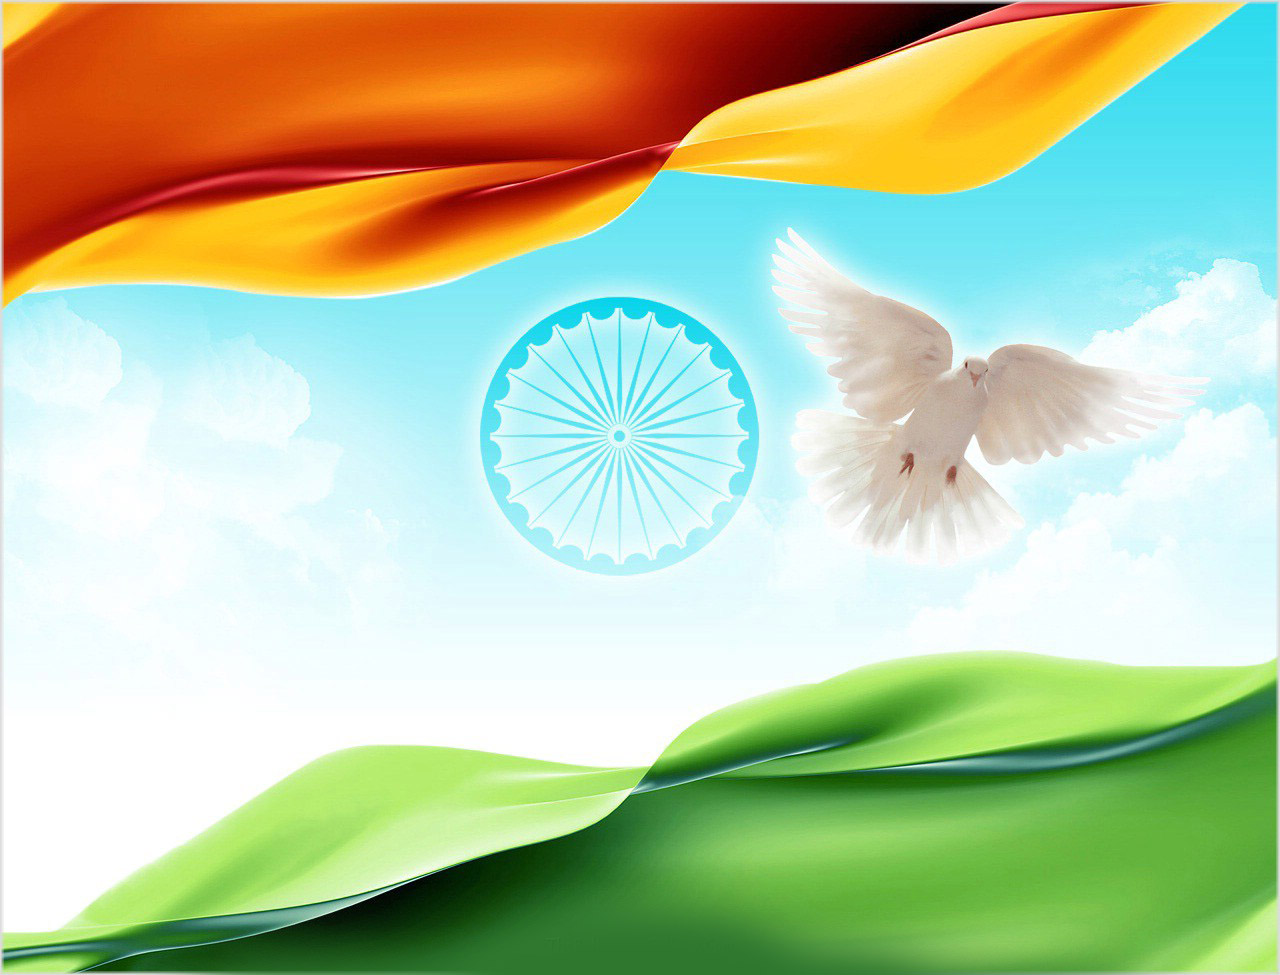 40 Beautiful Indian Independence Day Wallpapers and Greeting cards ...